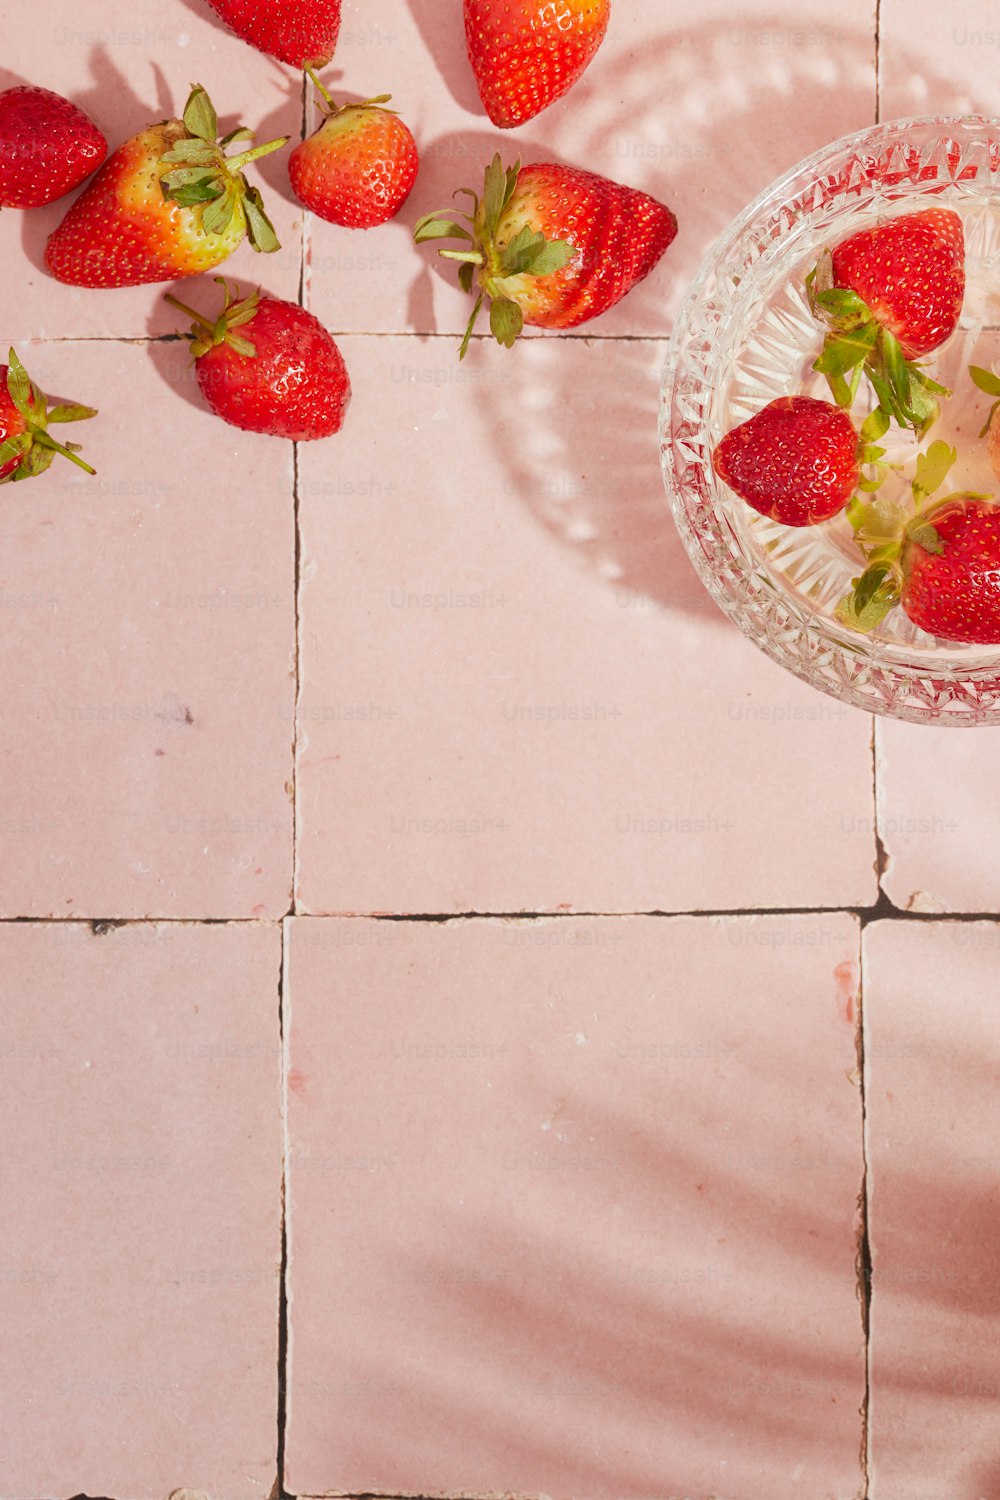 a bowl of strawberries on a pink tile floor